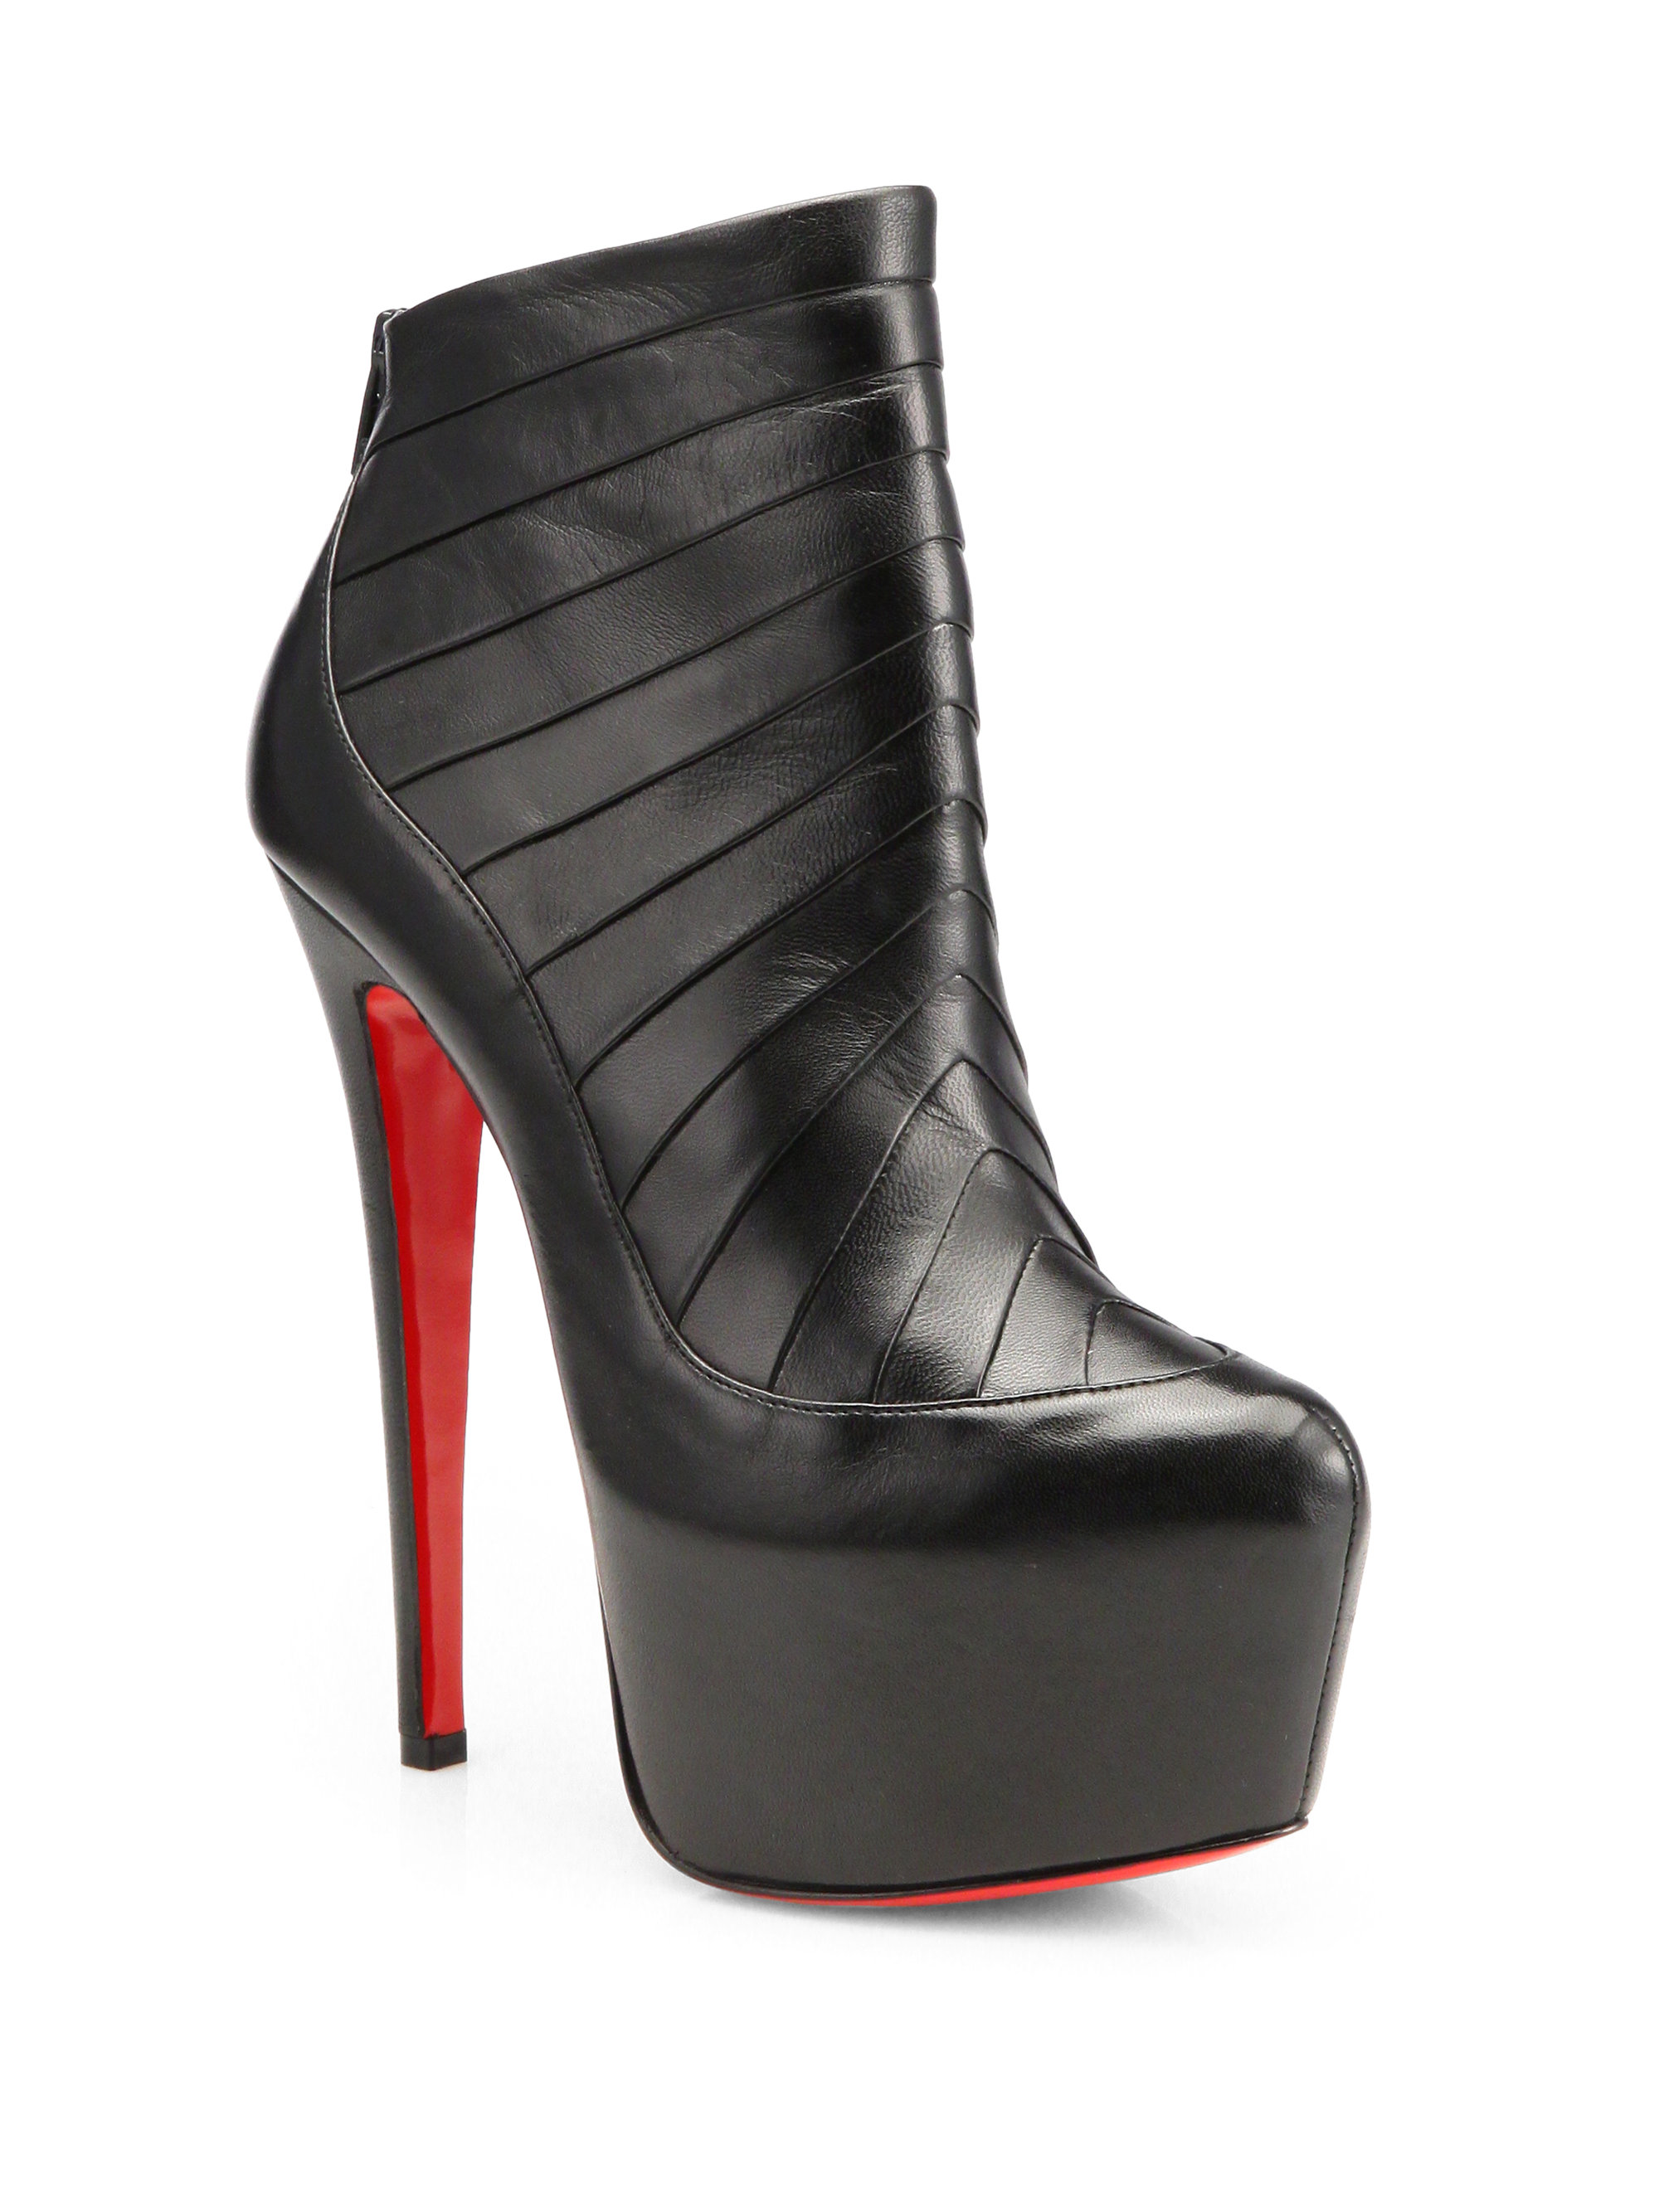 Christian Louboutin Amor Leather Platform Ankle Boots in Black - Lyst